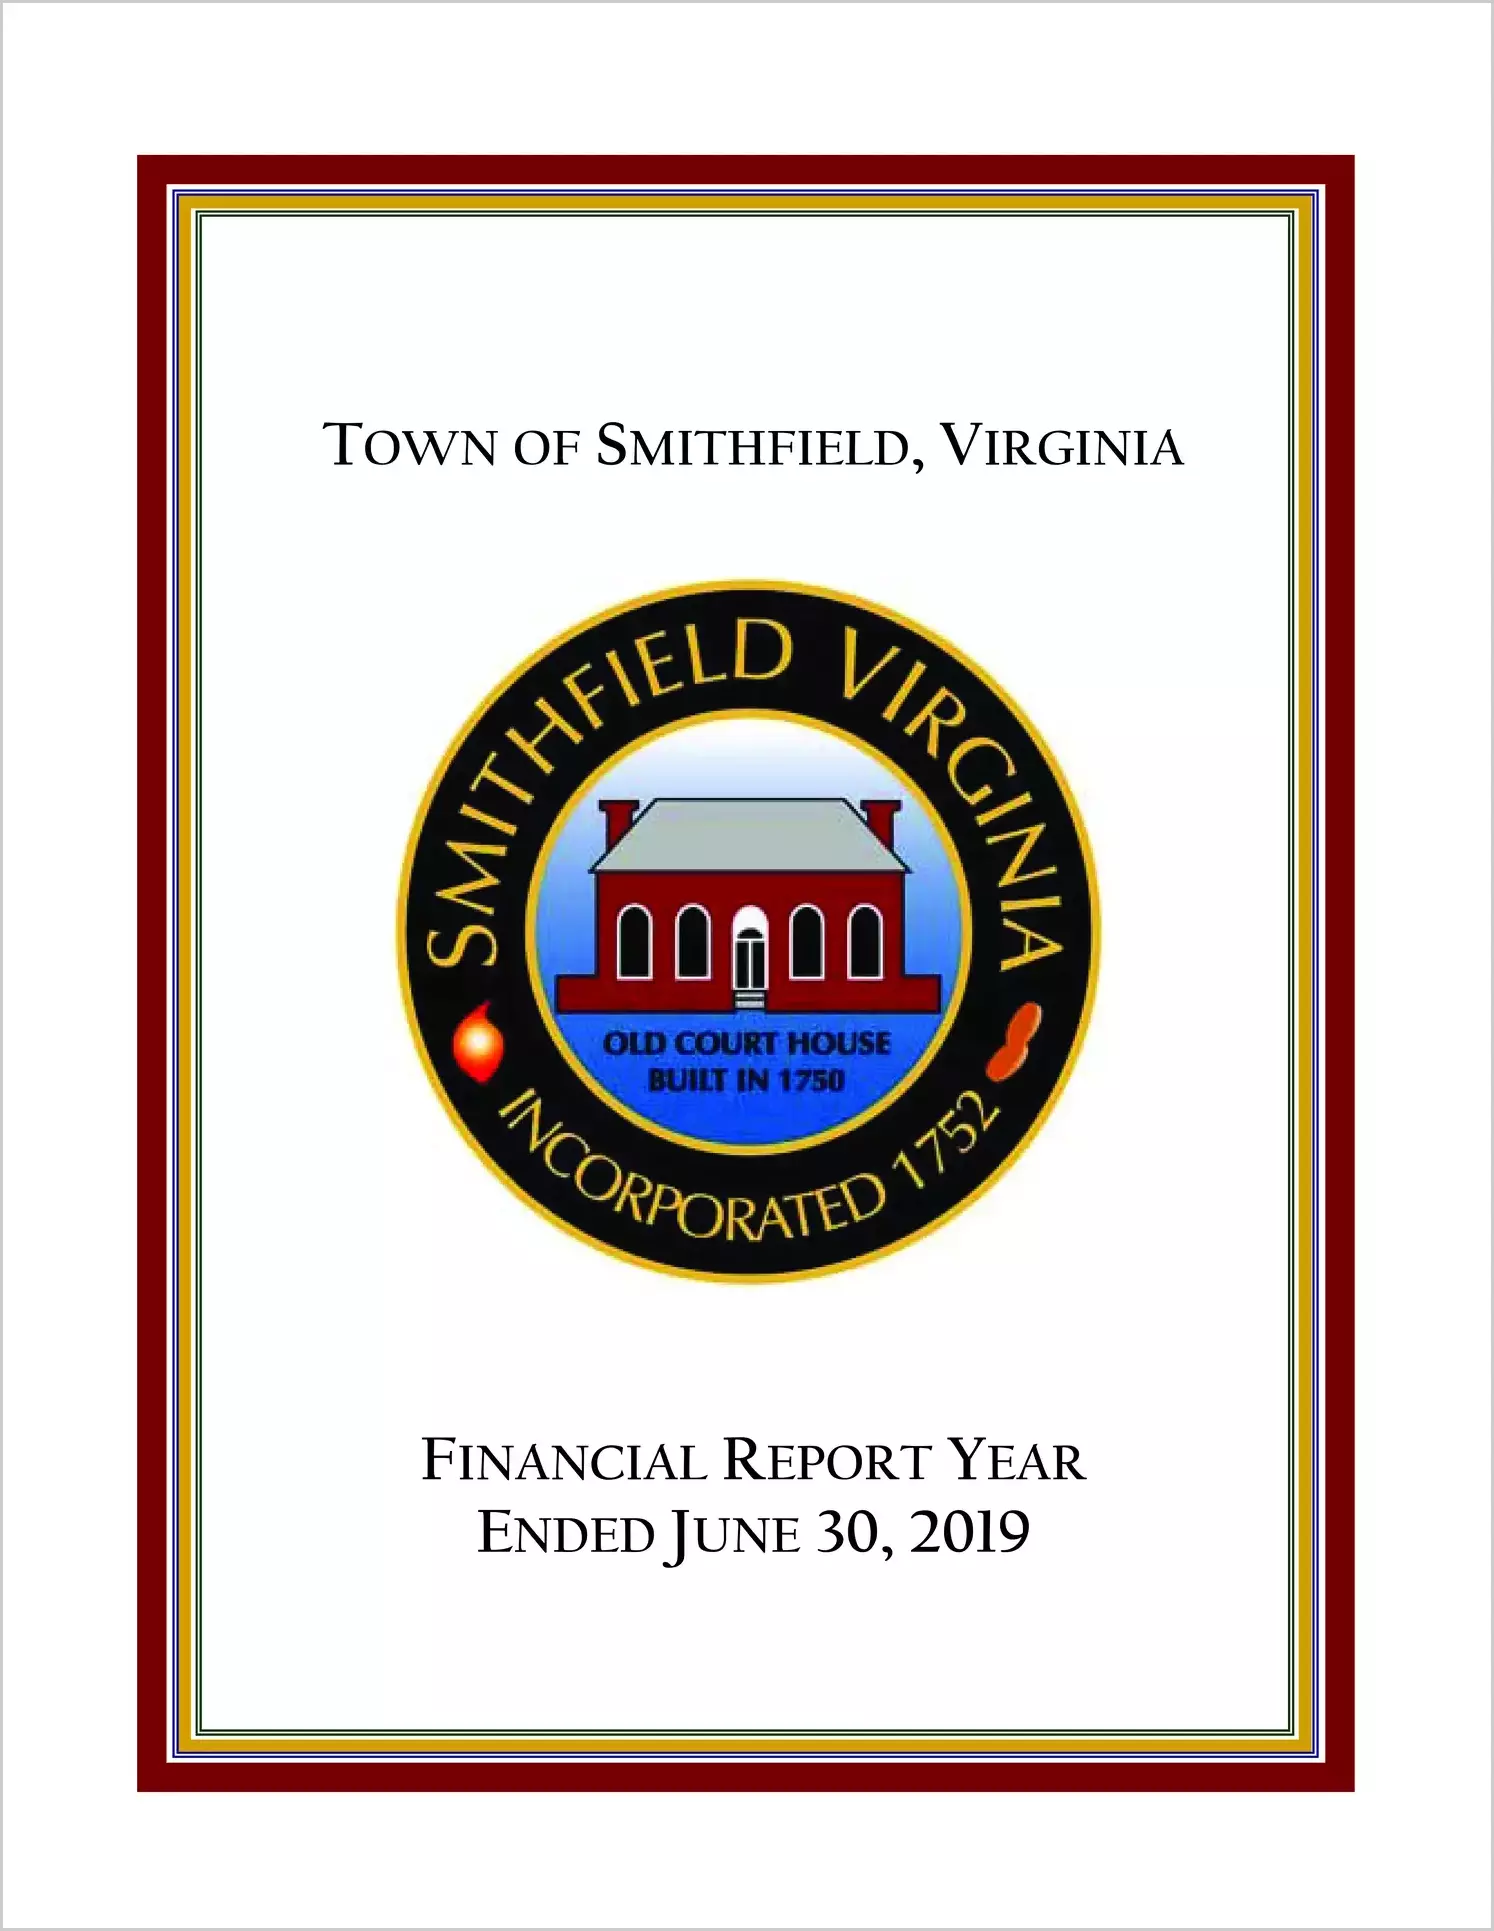 2019 Annual Financial Report for Town of Smithfield